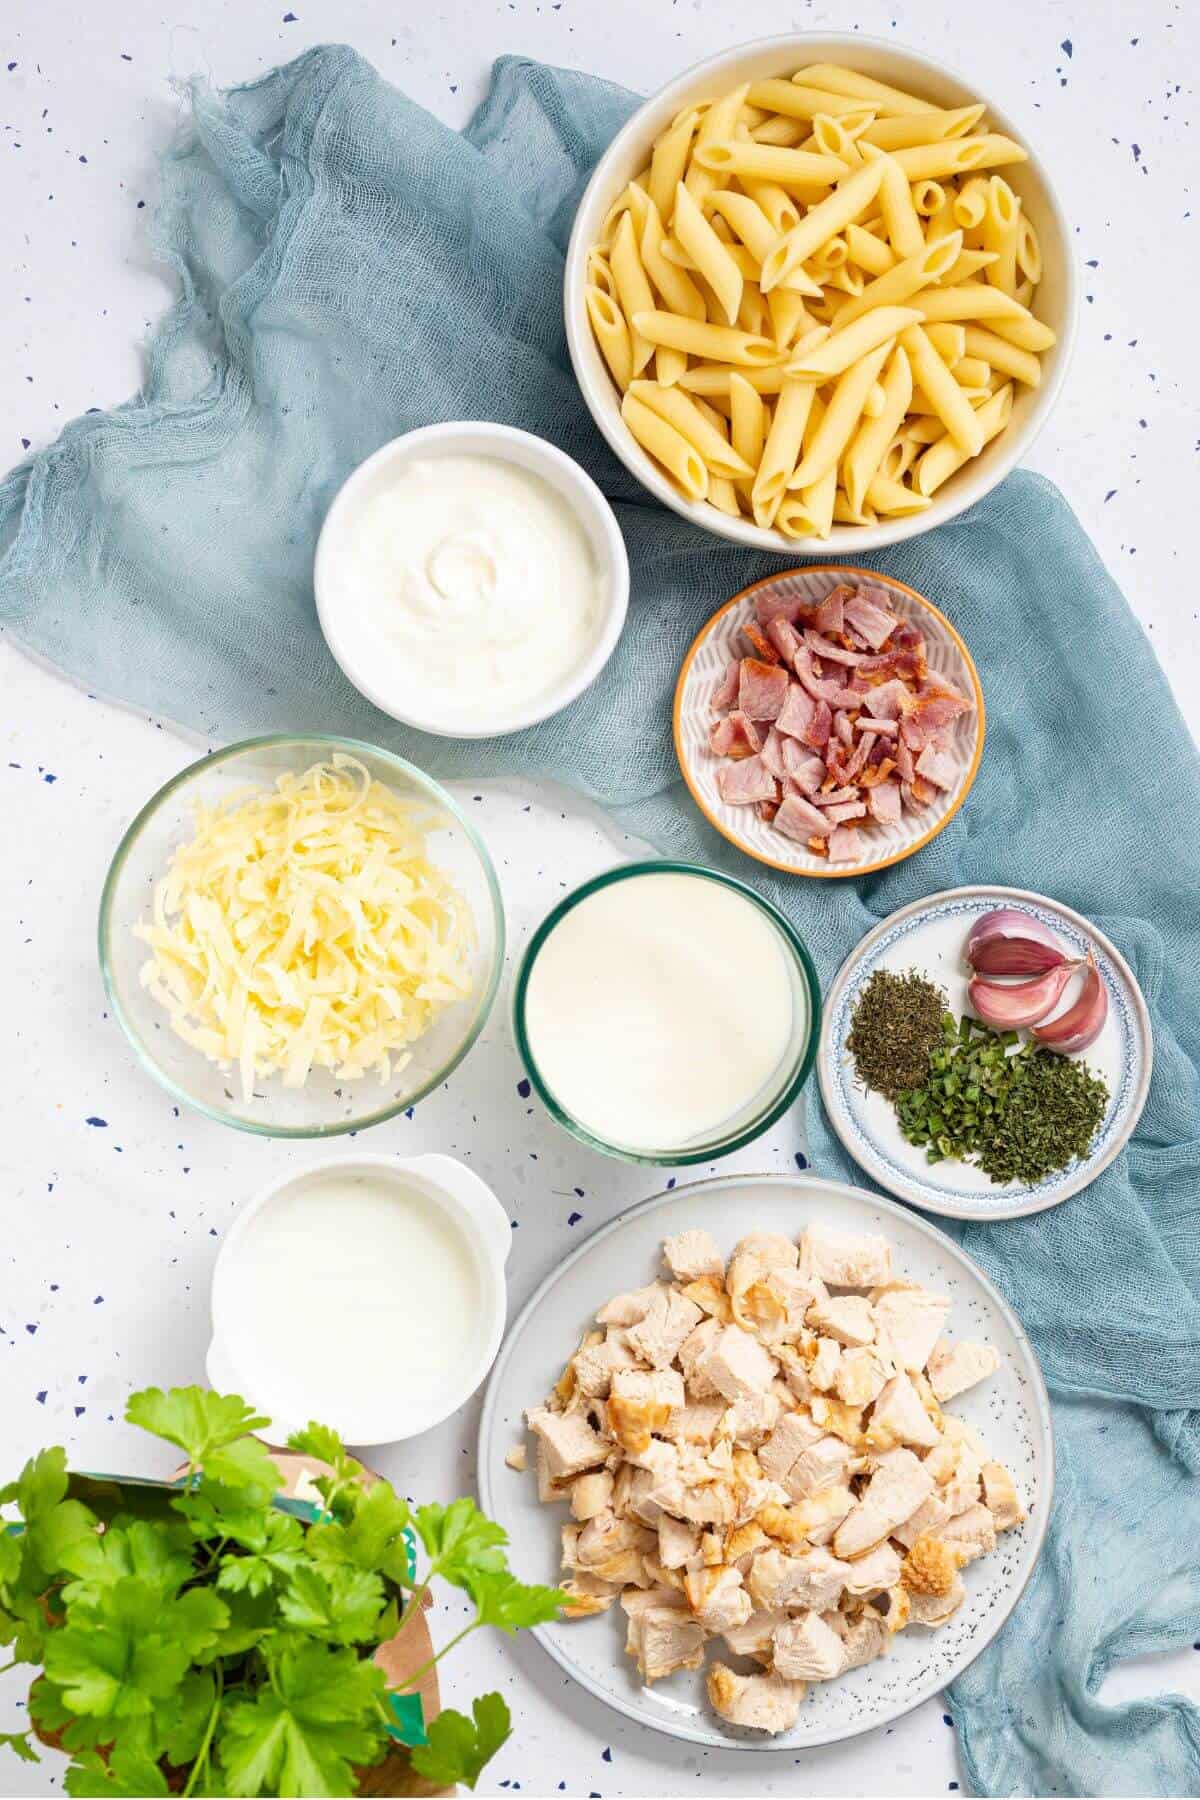 Ingredients for chicken bacon ranch casserole.